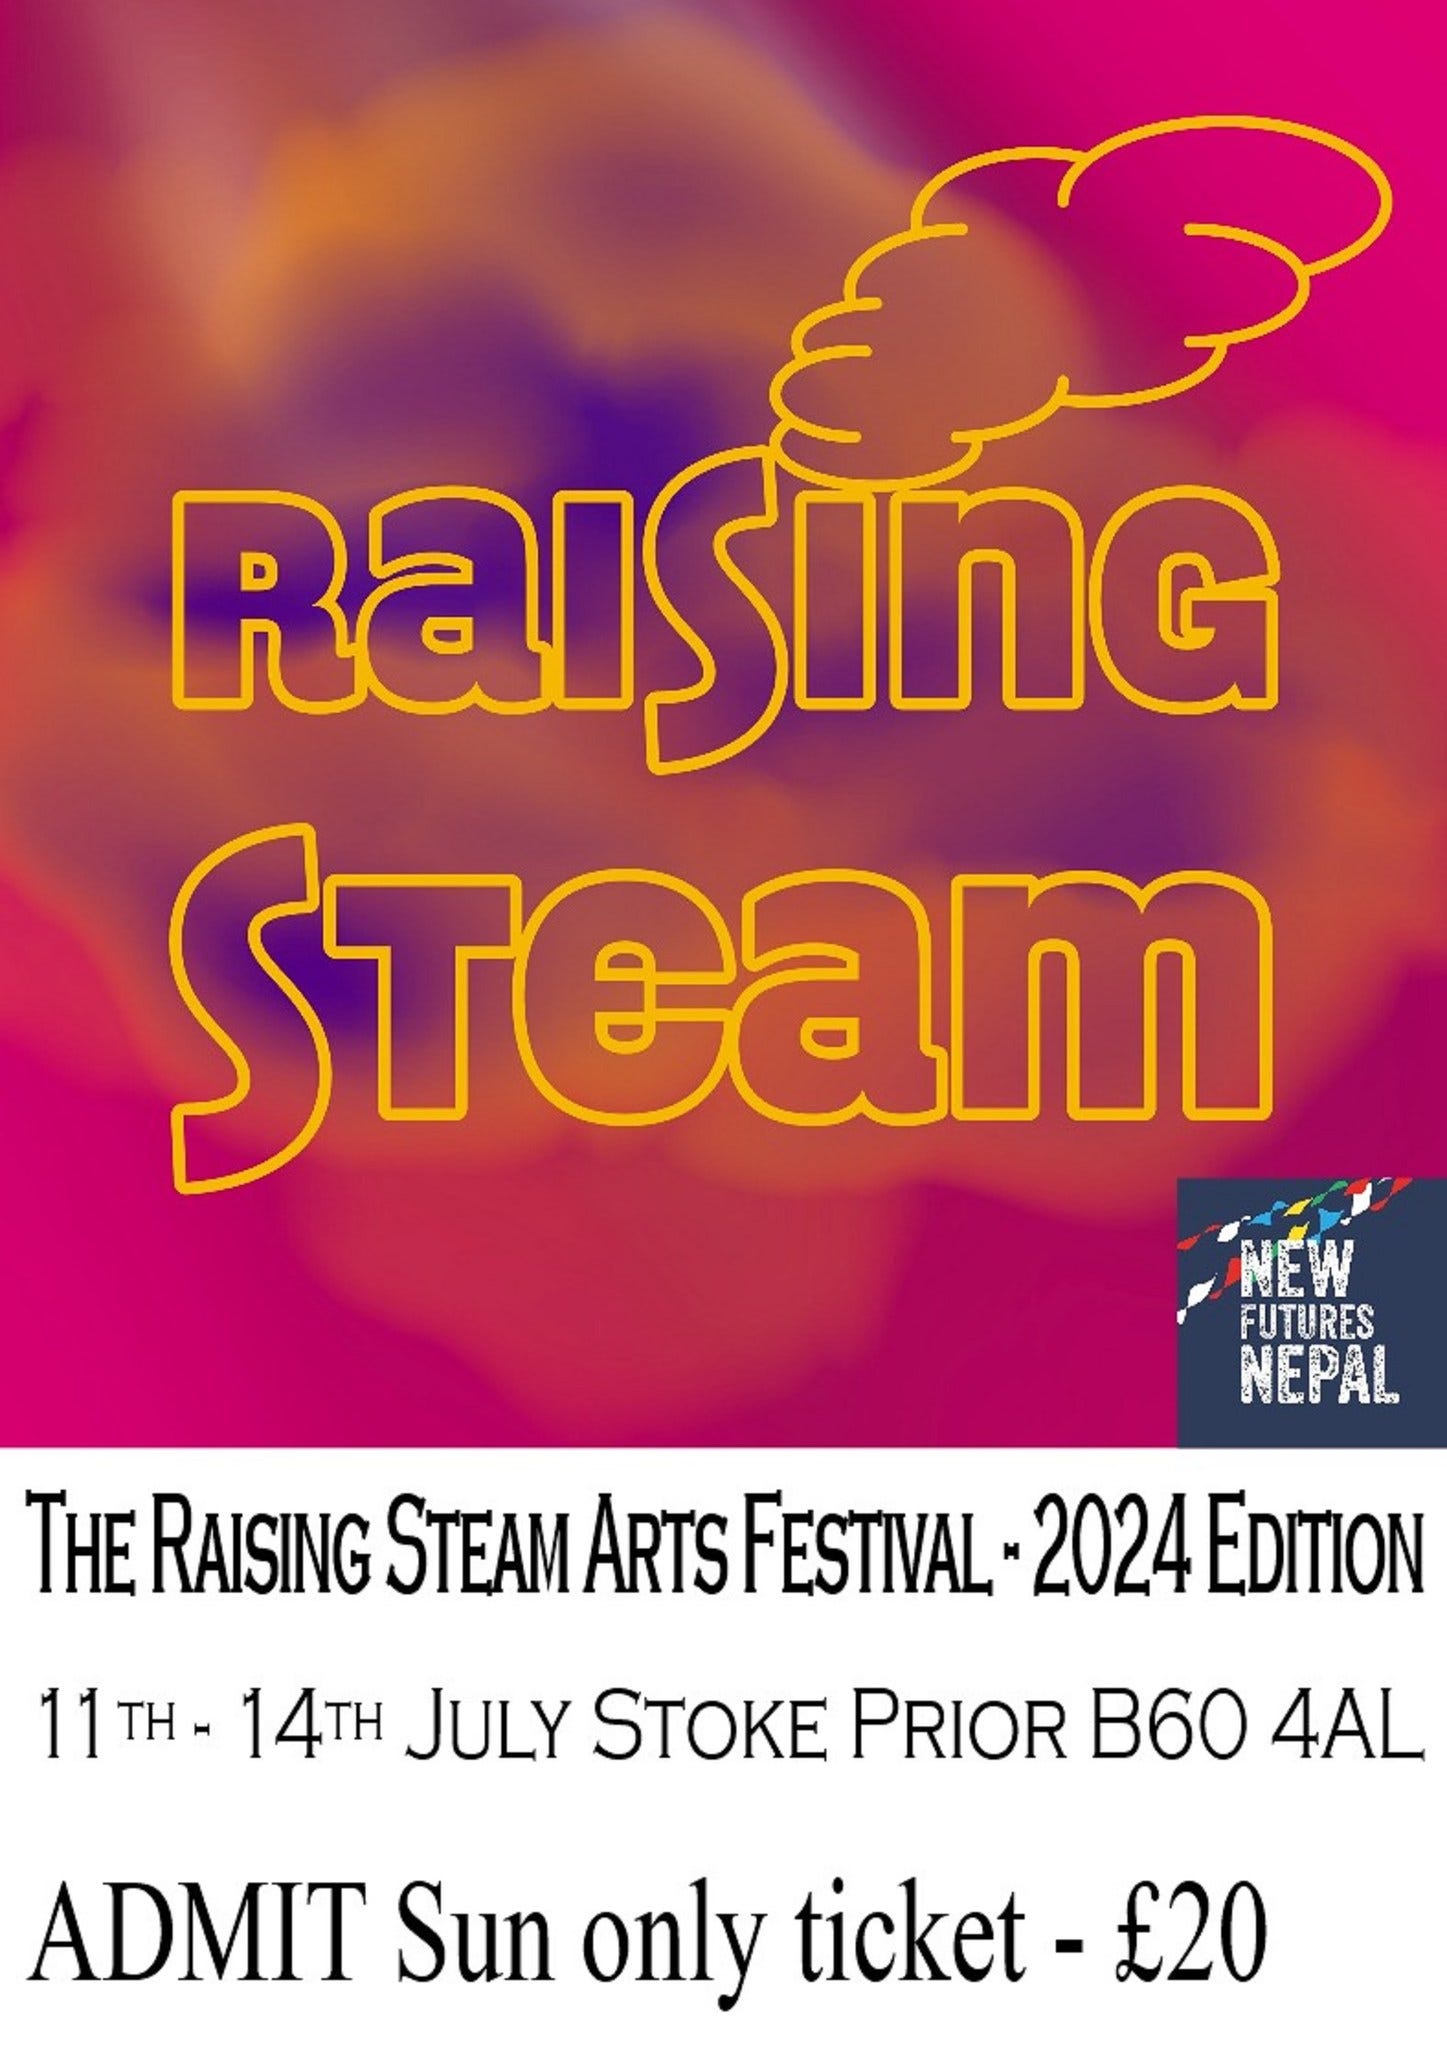 May be an image of text that says "RaISInG STeam NEW FUTURES NEPAL THE RAISING STEAM ARTS FESTIVAL 2024 EDITION 11 TH™ TH 14TH JULY STOKE PRIOR B60 4AL ADMIT Sun only ticket- £20"